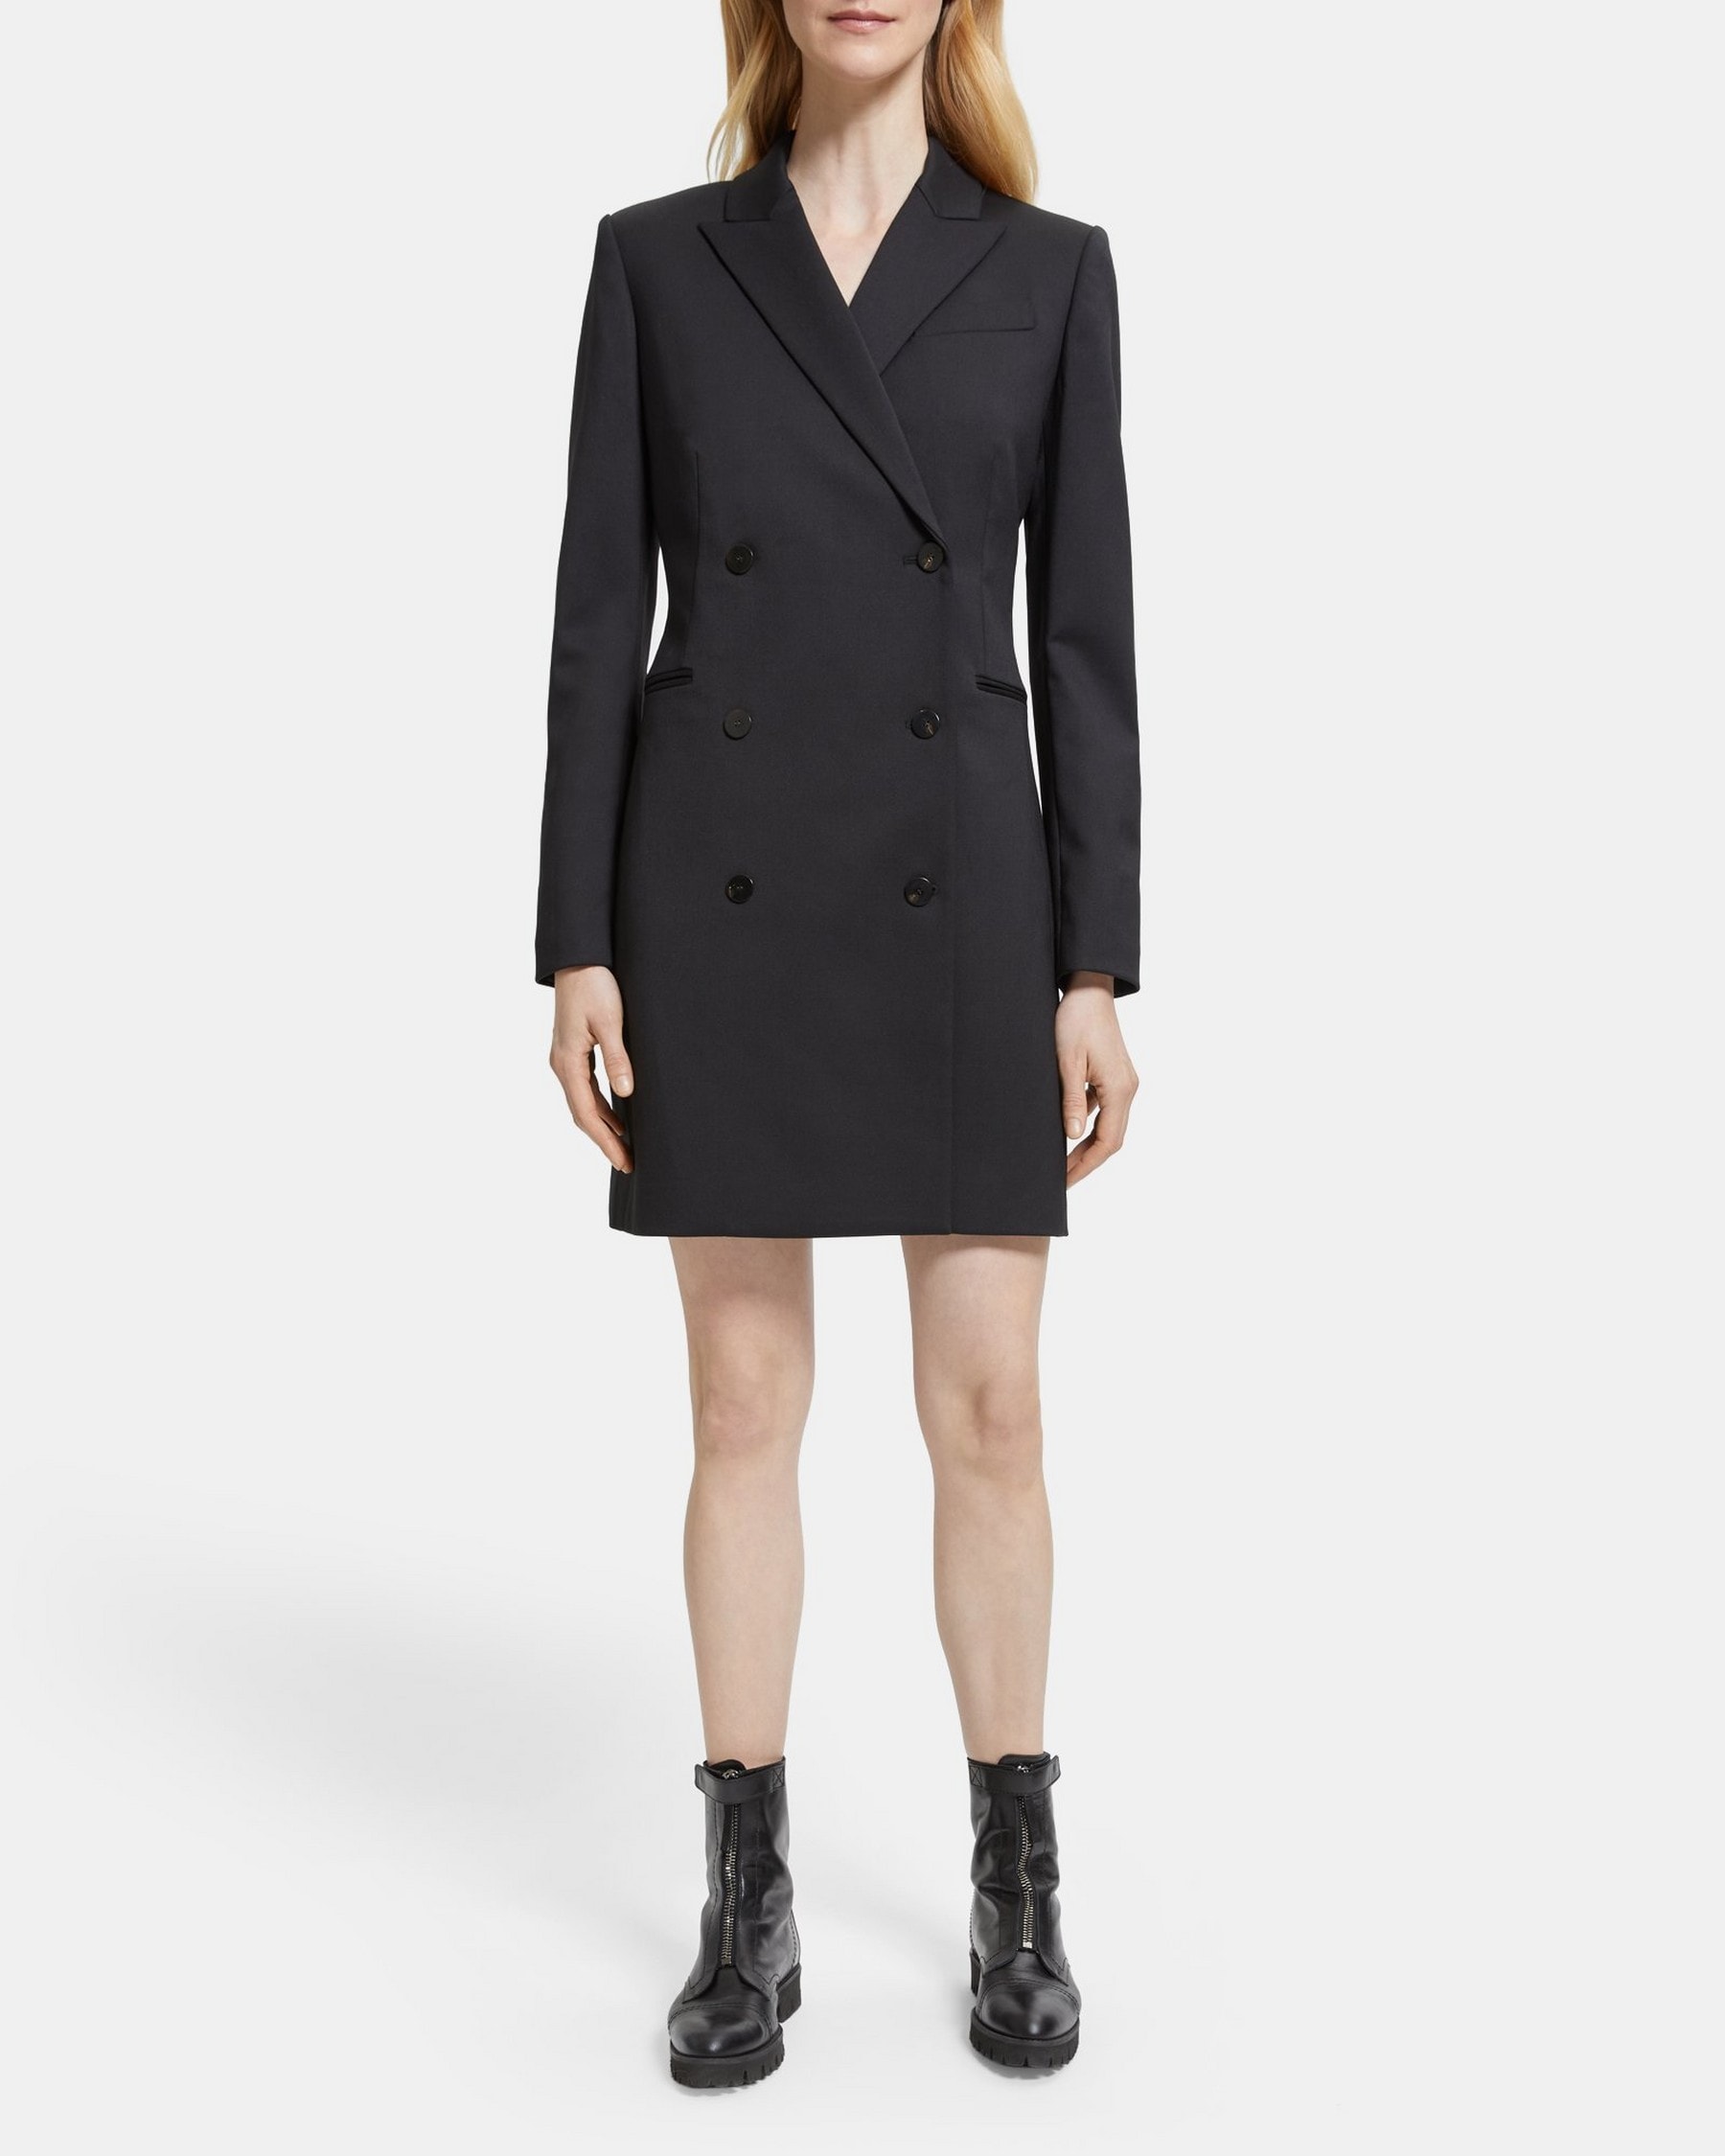 Theory Double-Breasted Blazer Dress in Stretch Wool-Blend